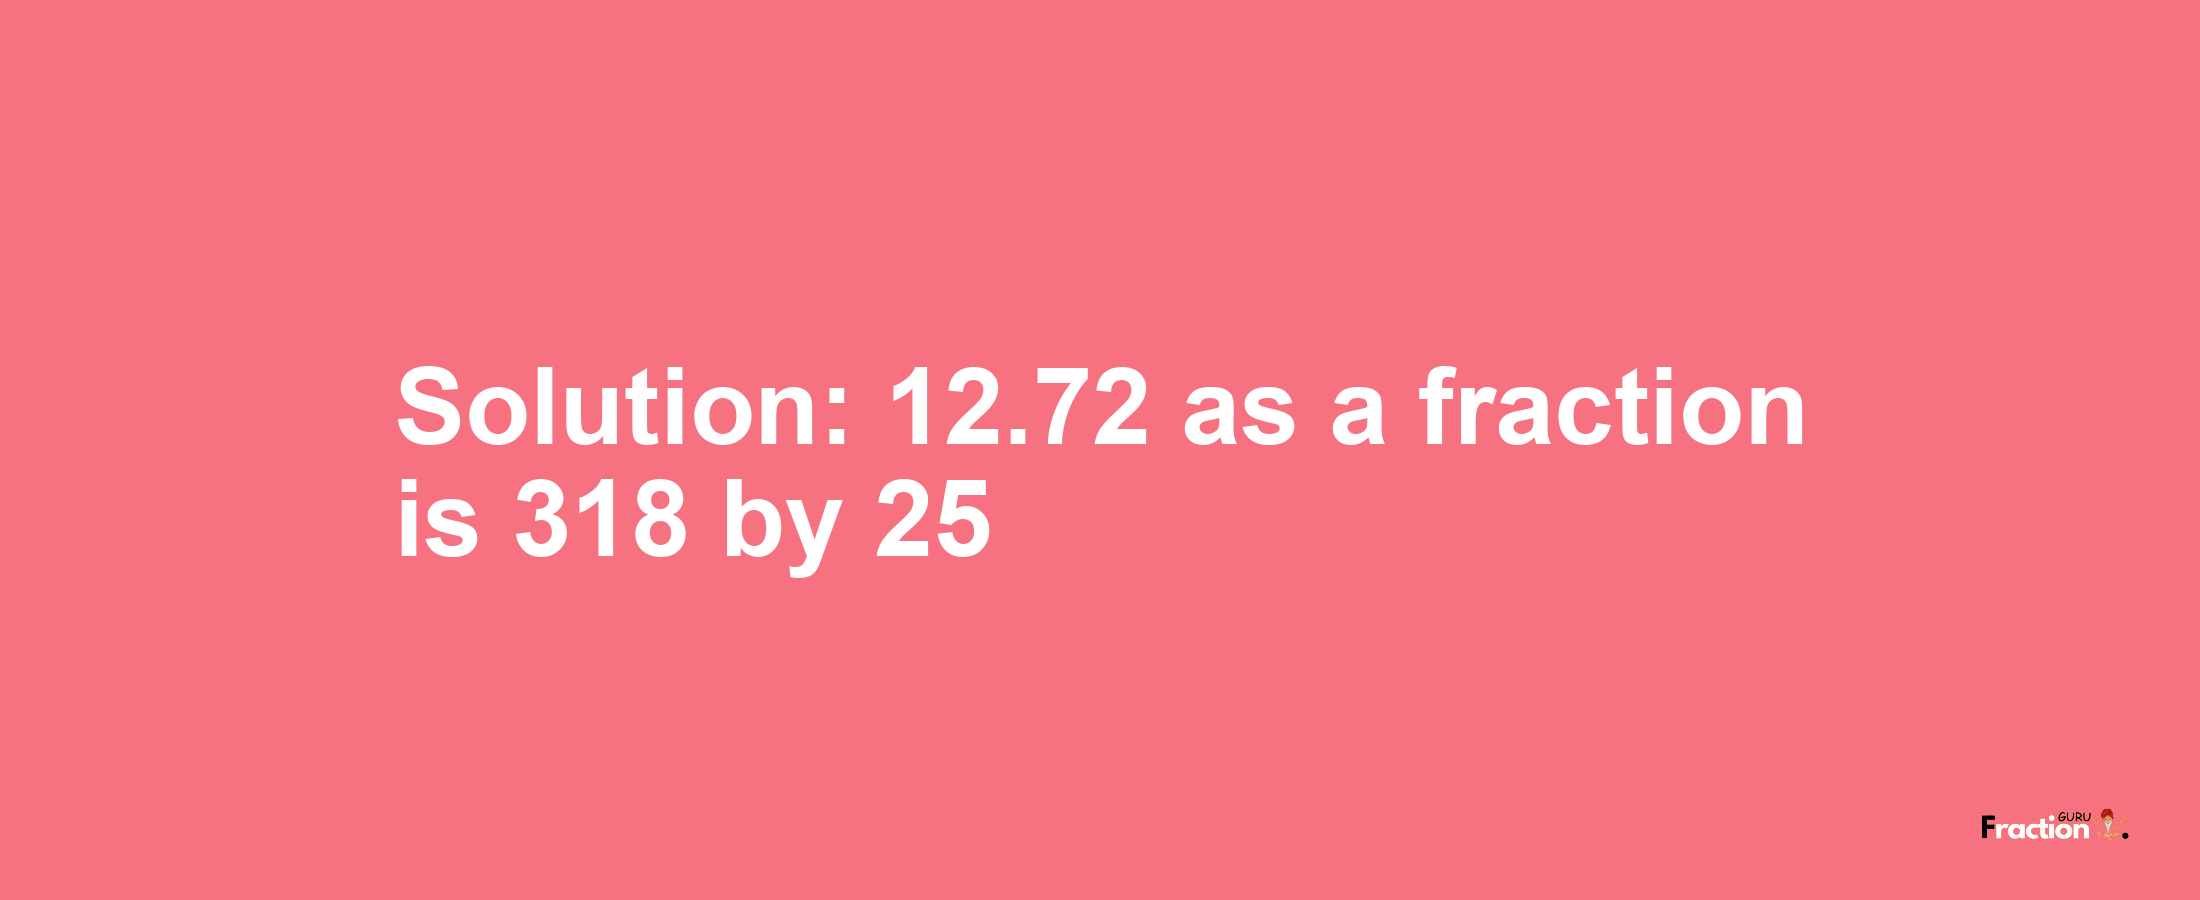 Solution:12.72 as a fraction is 318/25